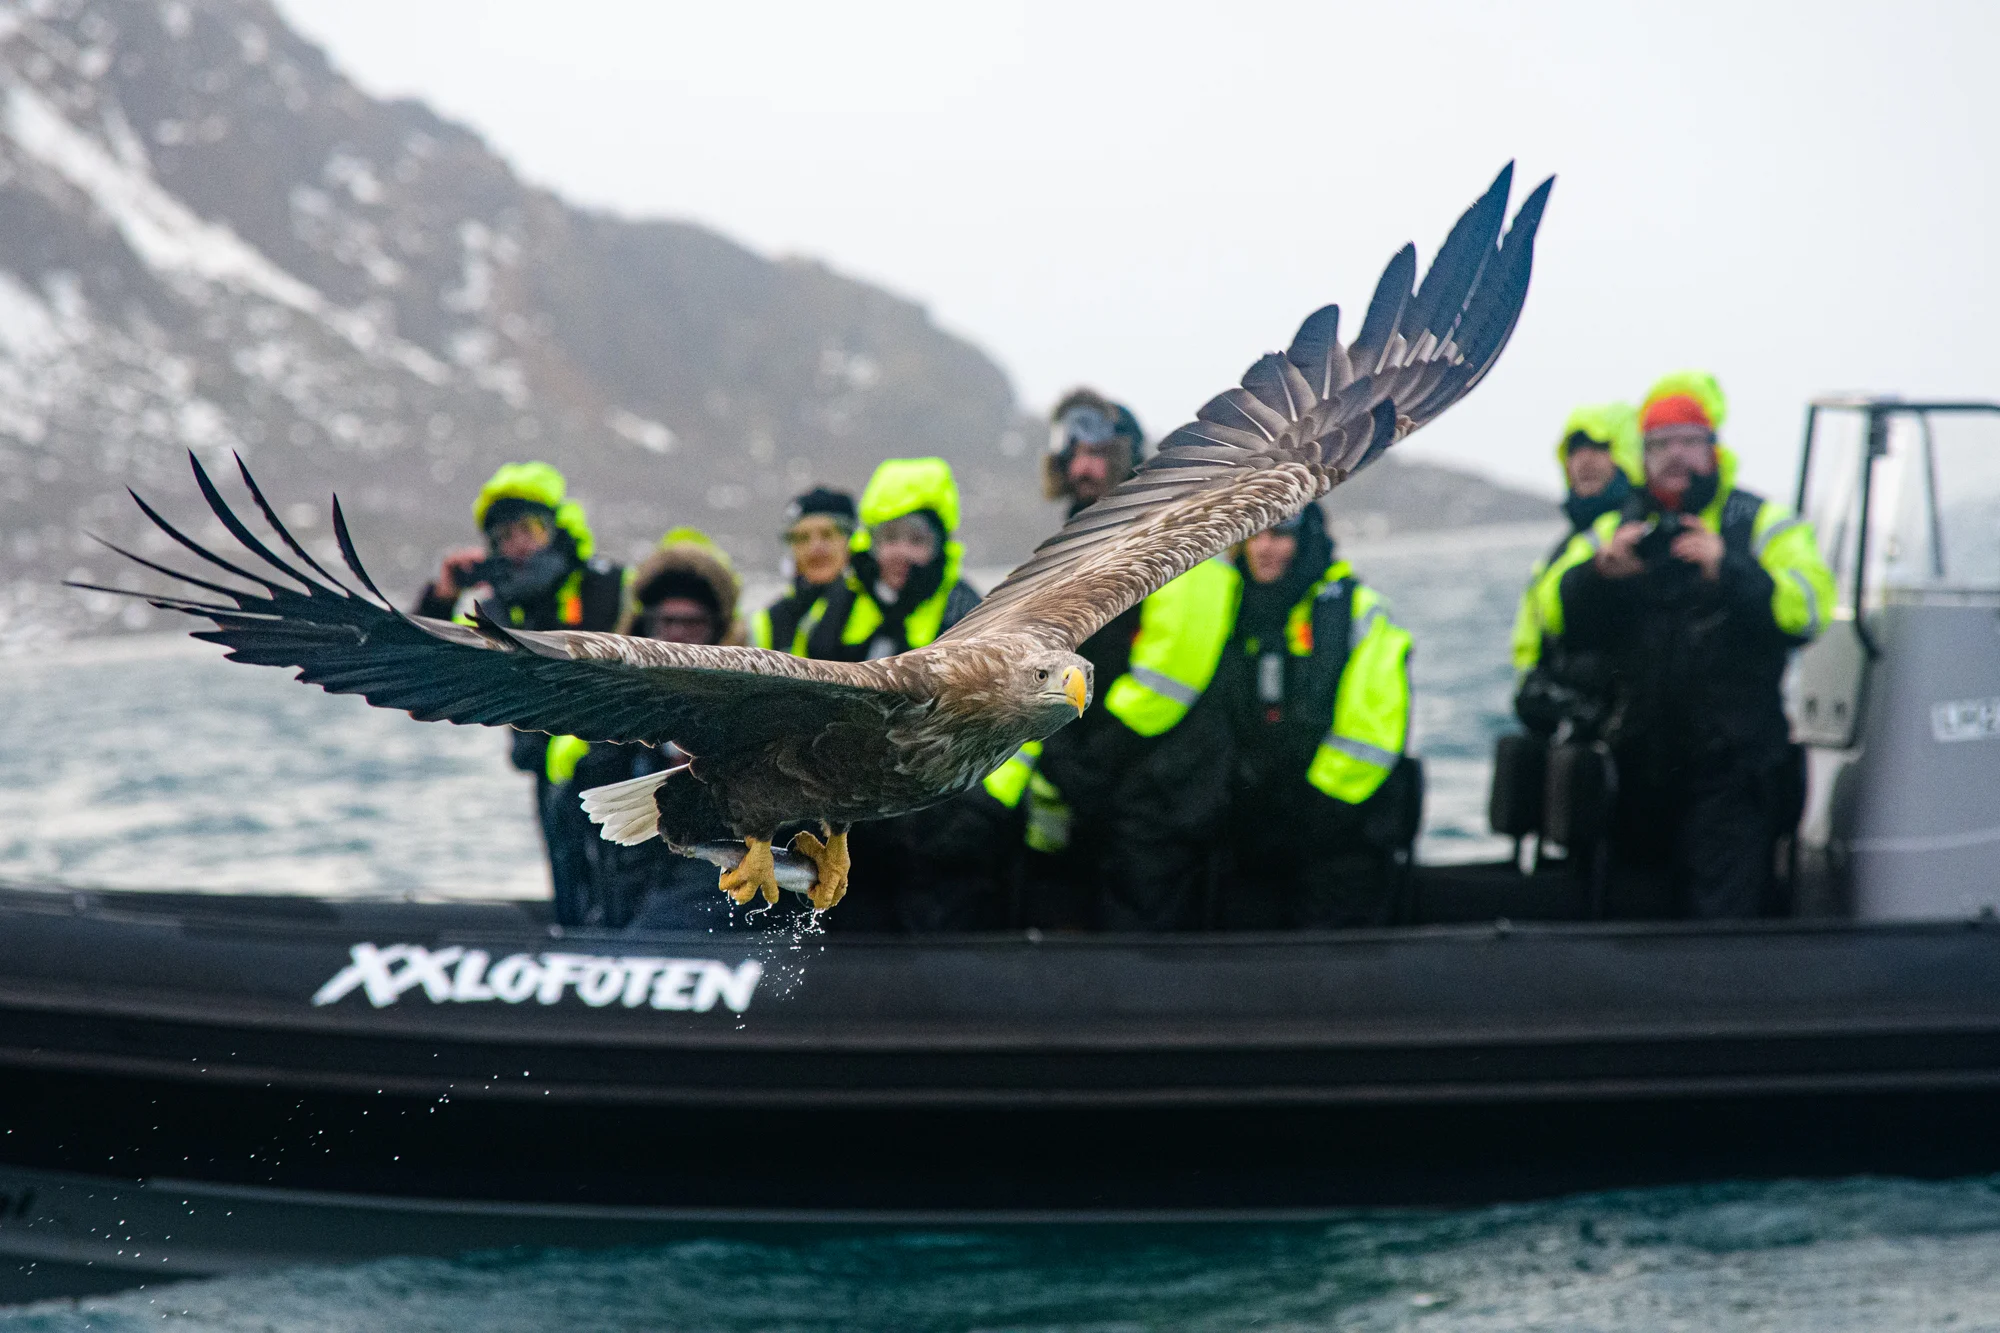 A sea eagle in a fjord near Svolvaer, Norway. Taken by Kevin Power